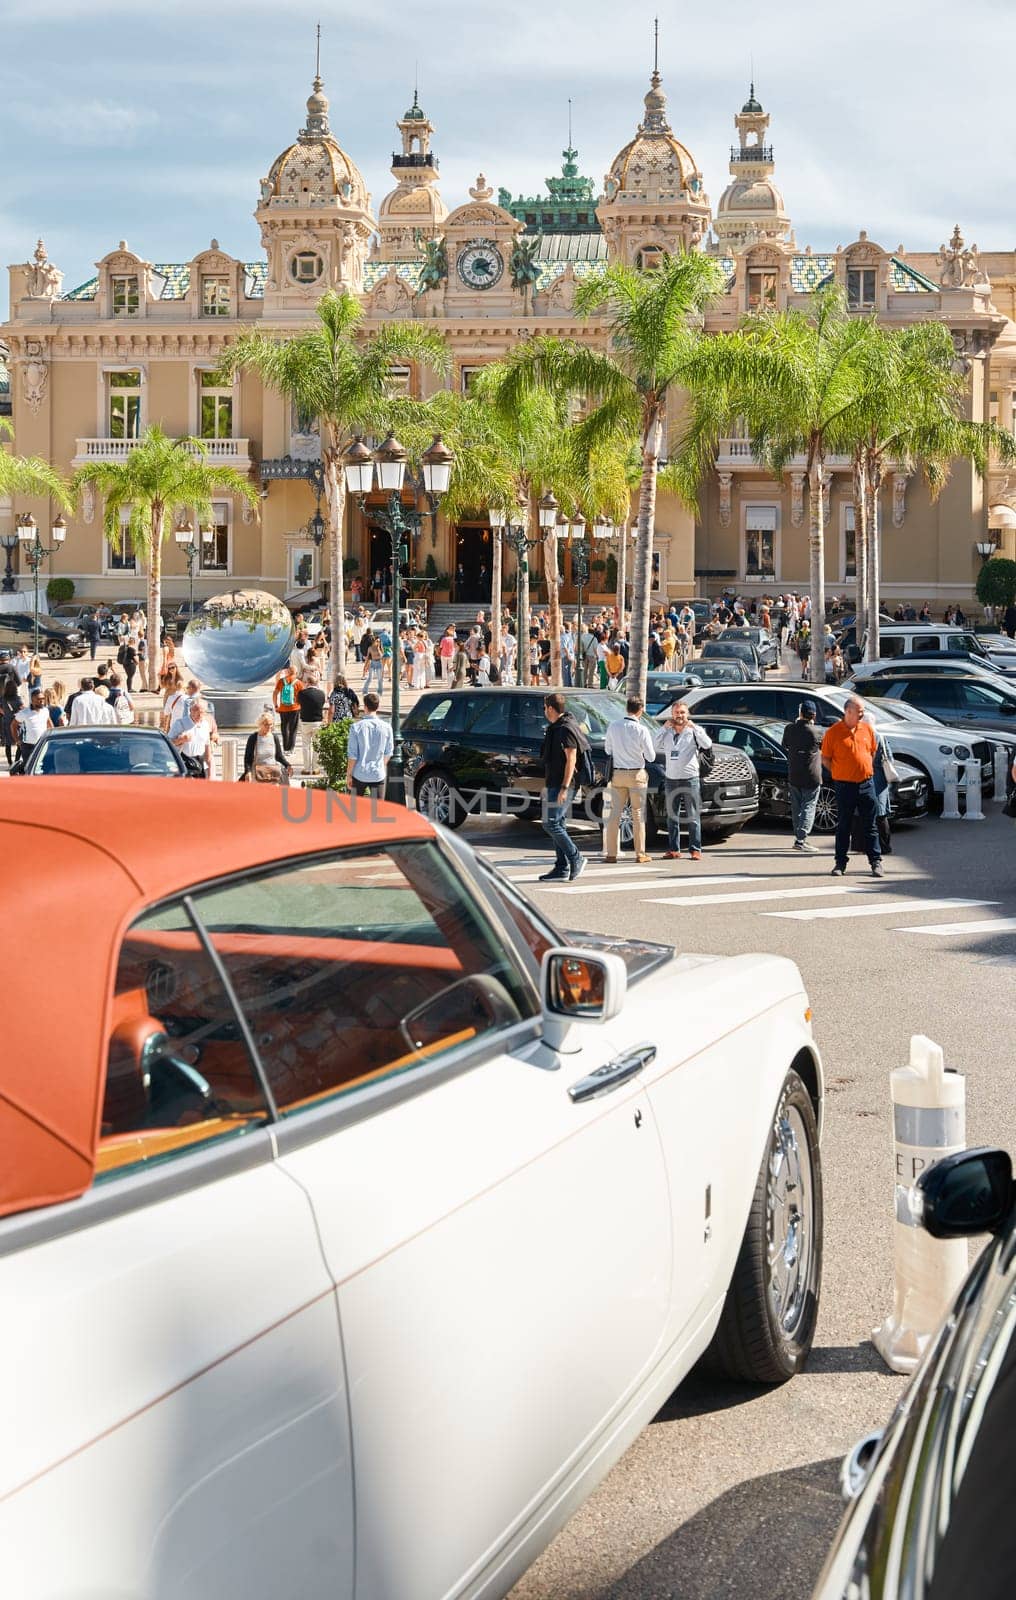 Monaco, Monte-Carlo, 29 September 2022 - Famous square Casino Monte-Carlo at sunny day, the red roof of a Rolls Royce convertible, luxury cars, wealth life, tourists take pictures of the landmark. High quality photo